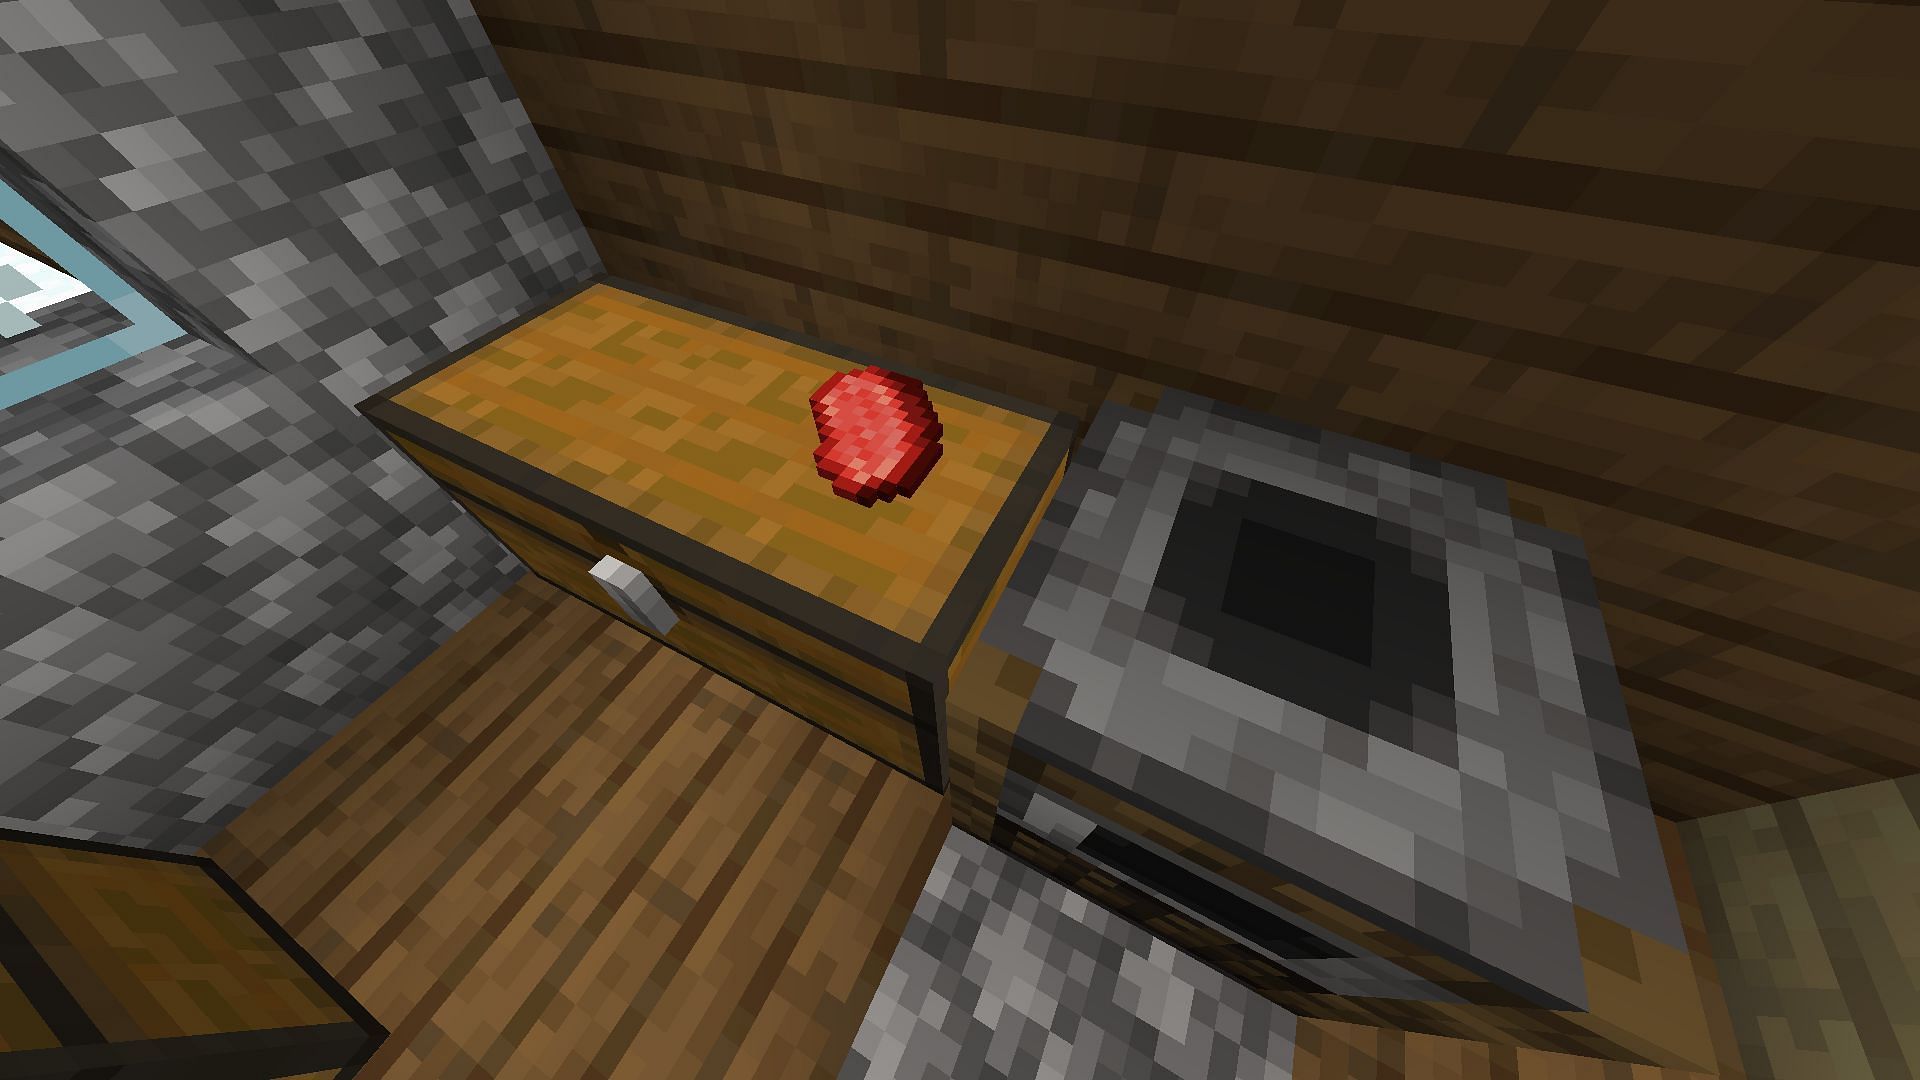 A raw steak on a chest with the help of invisible item frames in Minecraft (Image via Mojang)